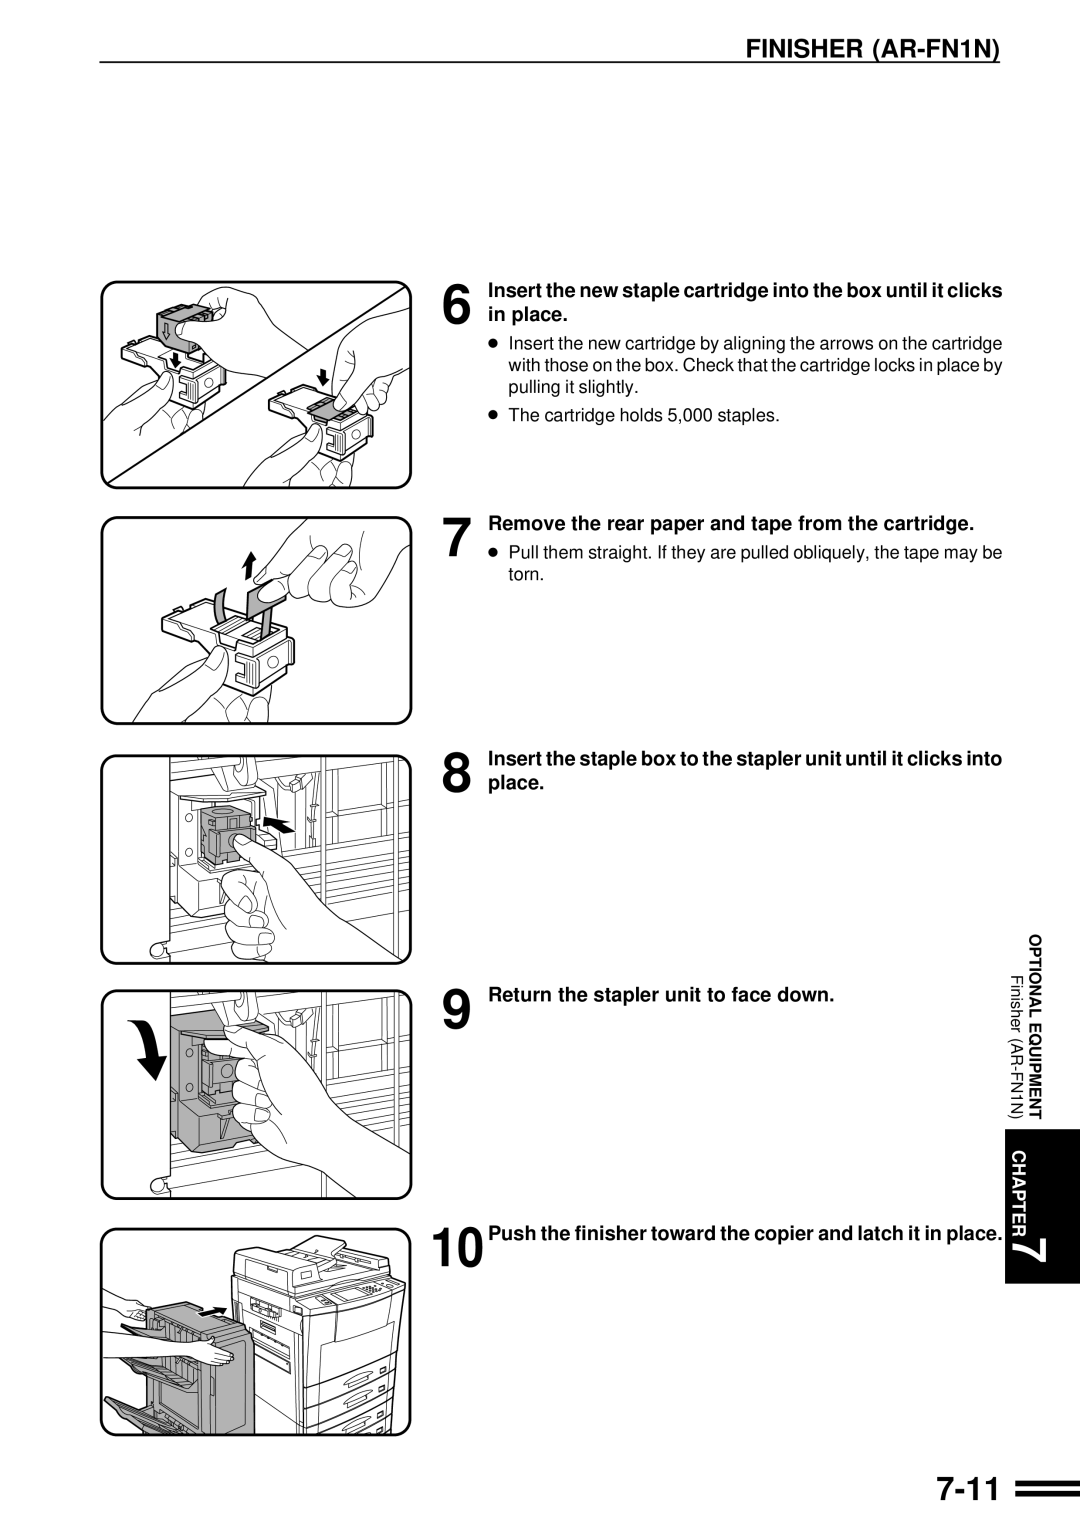 Sharp AR-287 manual 7-11, Insert the new staple cartridge into the box until it clicks, in place 